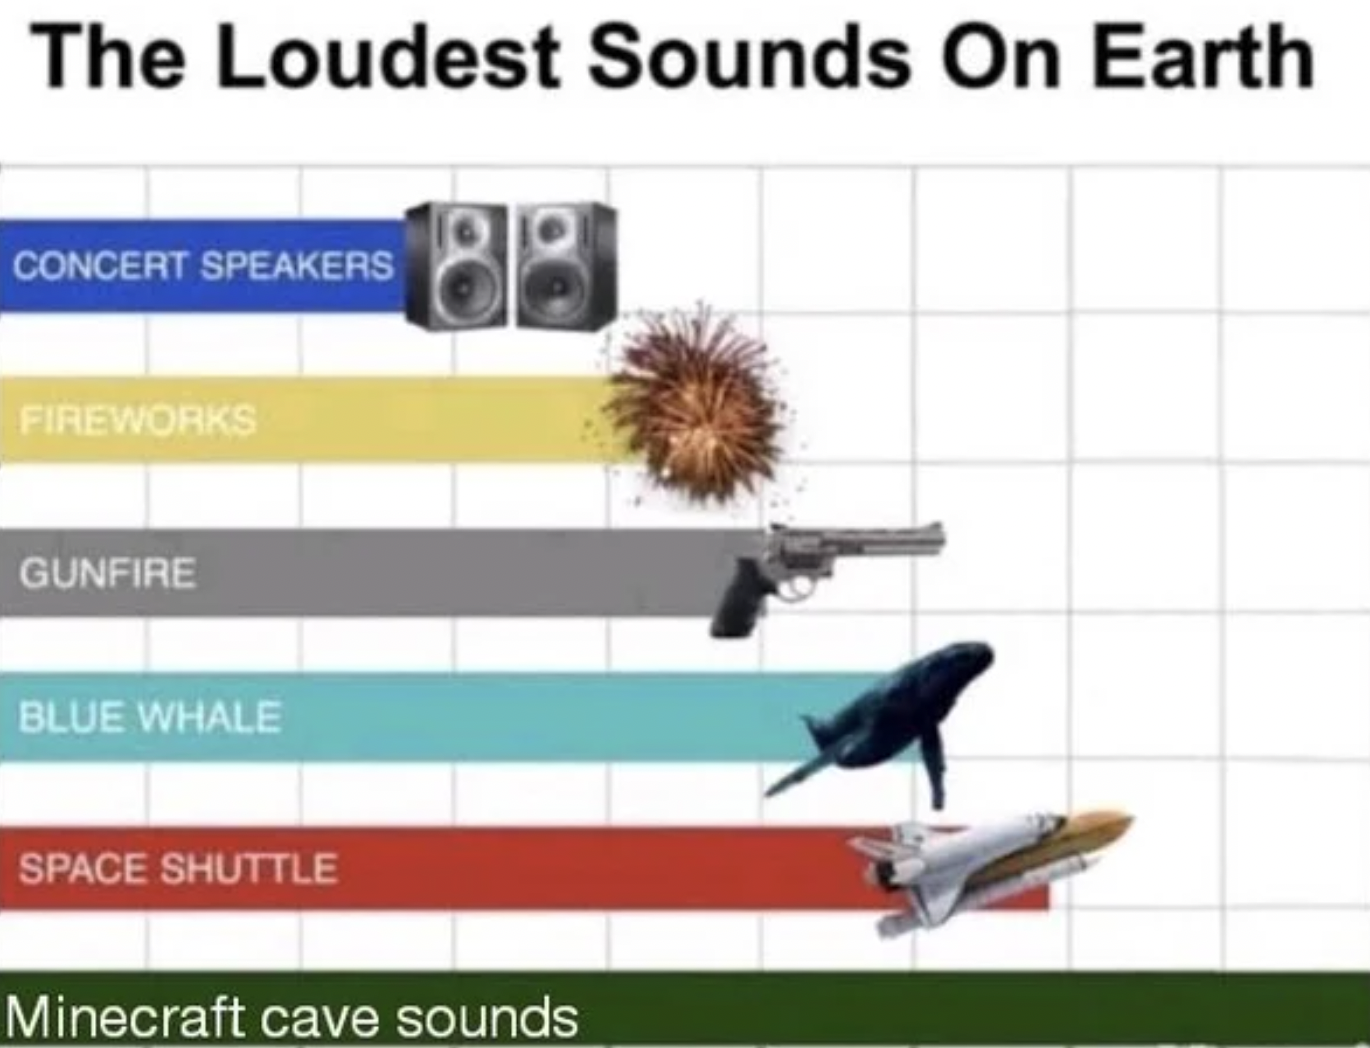 Minecraft Memes - loudest sounds on earth - The Loudest Sounds On Earth Concert Speakers Fireworks Gunfire Blue Whale Space Shuttle Minecraft cave sounds